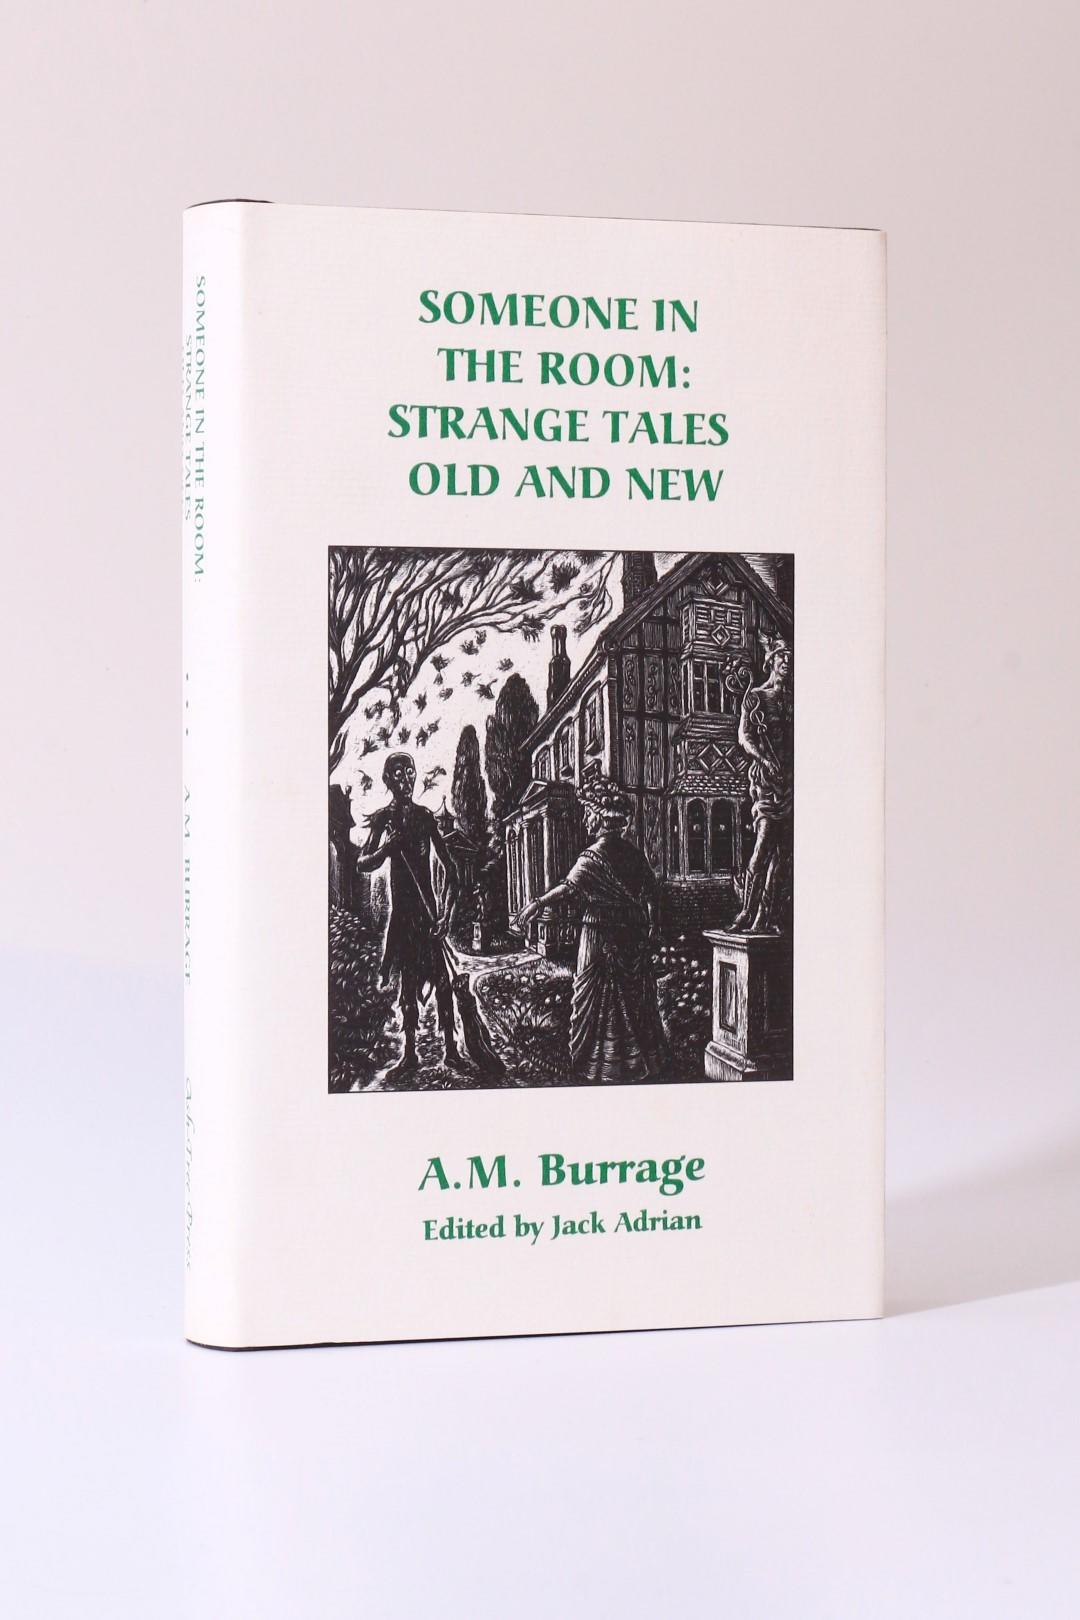 A.M. Burrage [Jack Adrian, ed.] - Someone in the Room: Strange Tales Old and New - Ash-Tree Press, 1997, Limited Edition.